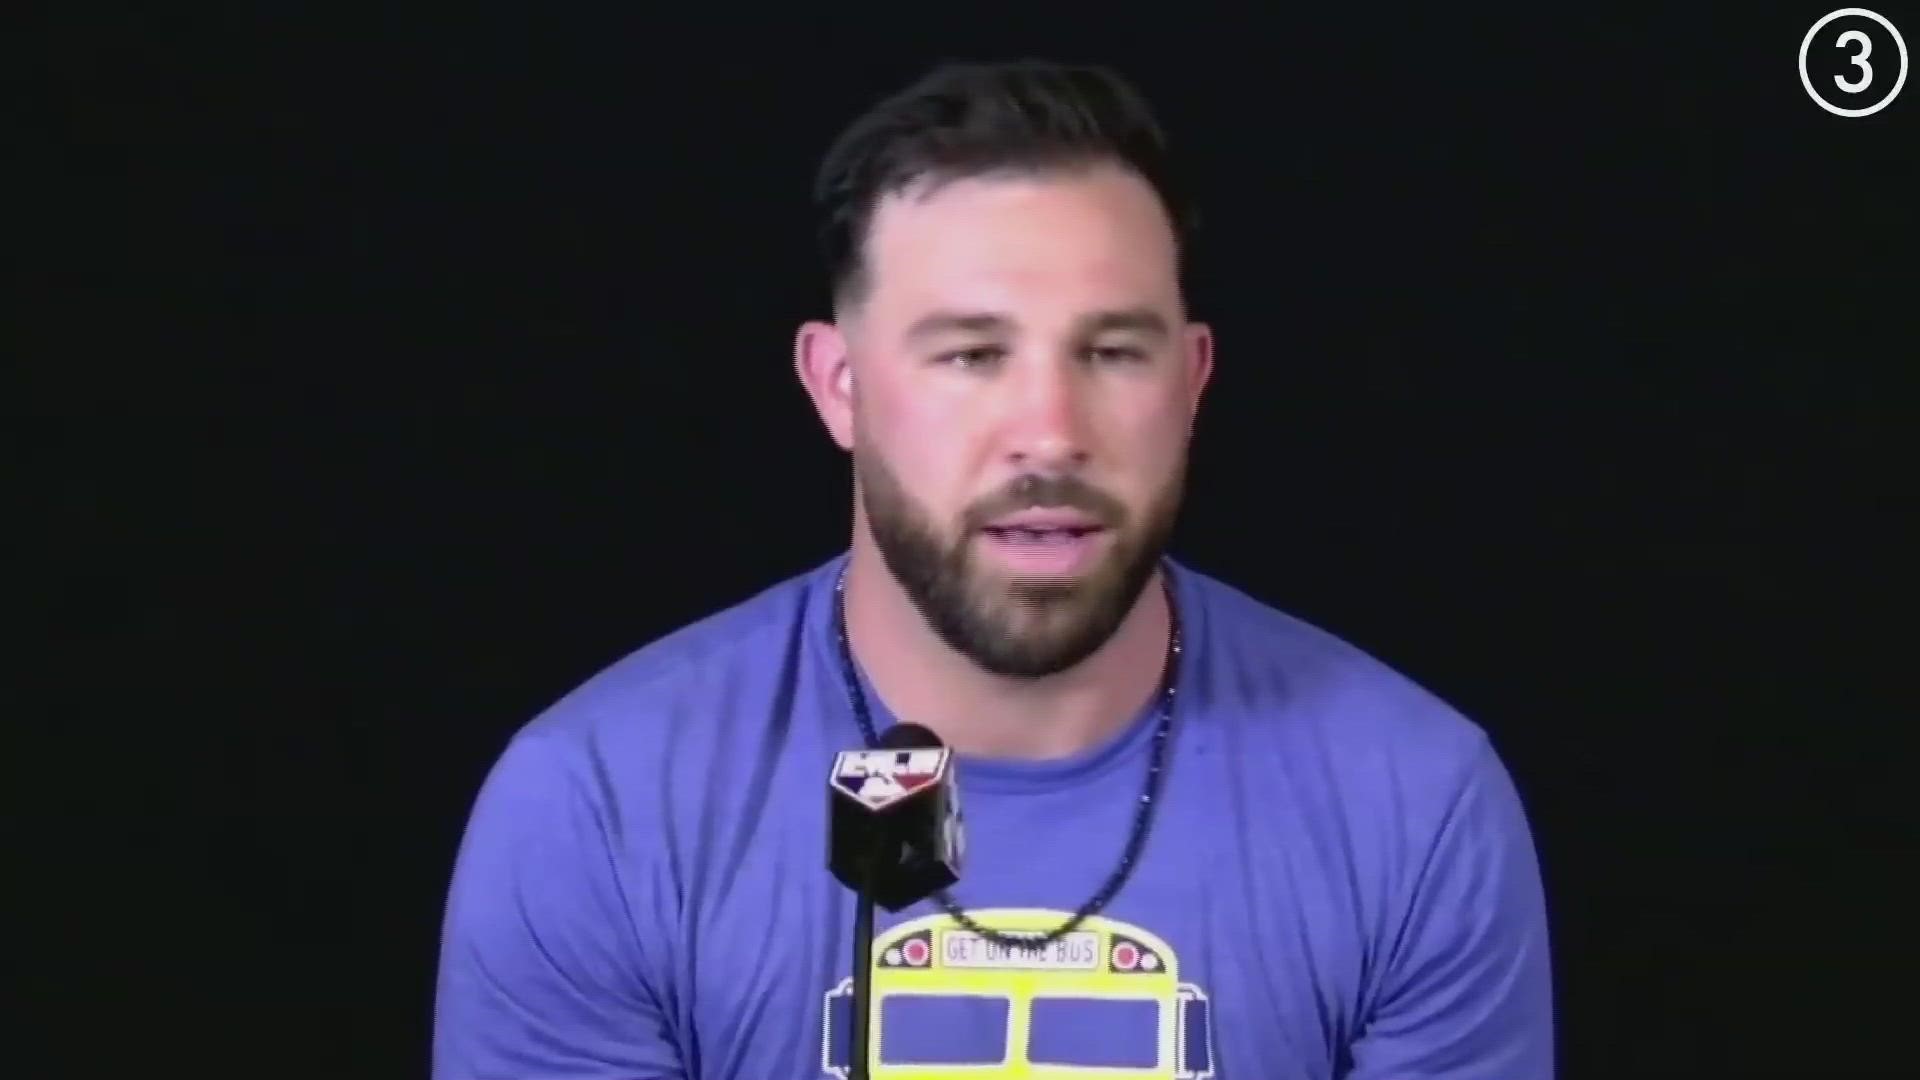 Jason Kipnis is back in Cleveland.  But this time, he's playing as a member of the Chicago Cubs.  Hear what he had to say about returning to Cleveland.